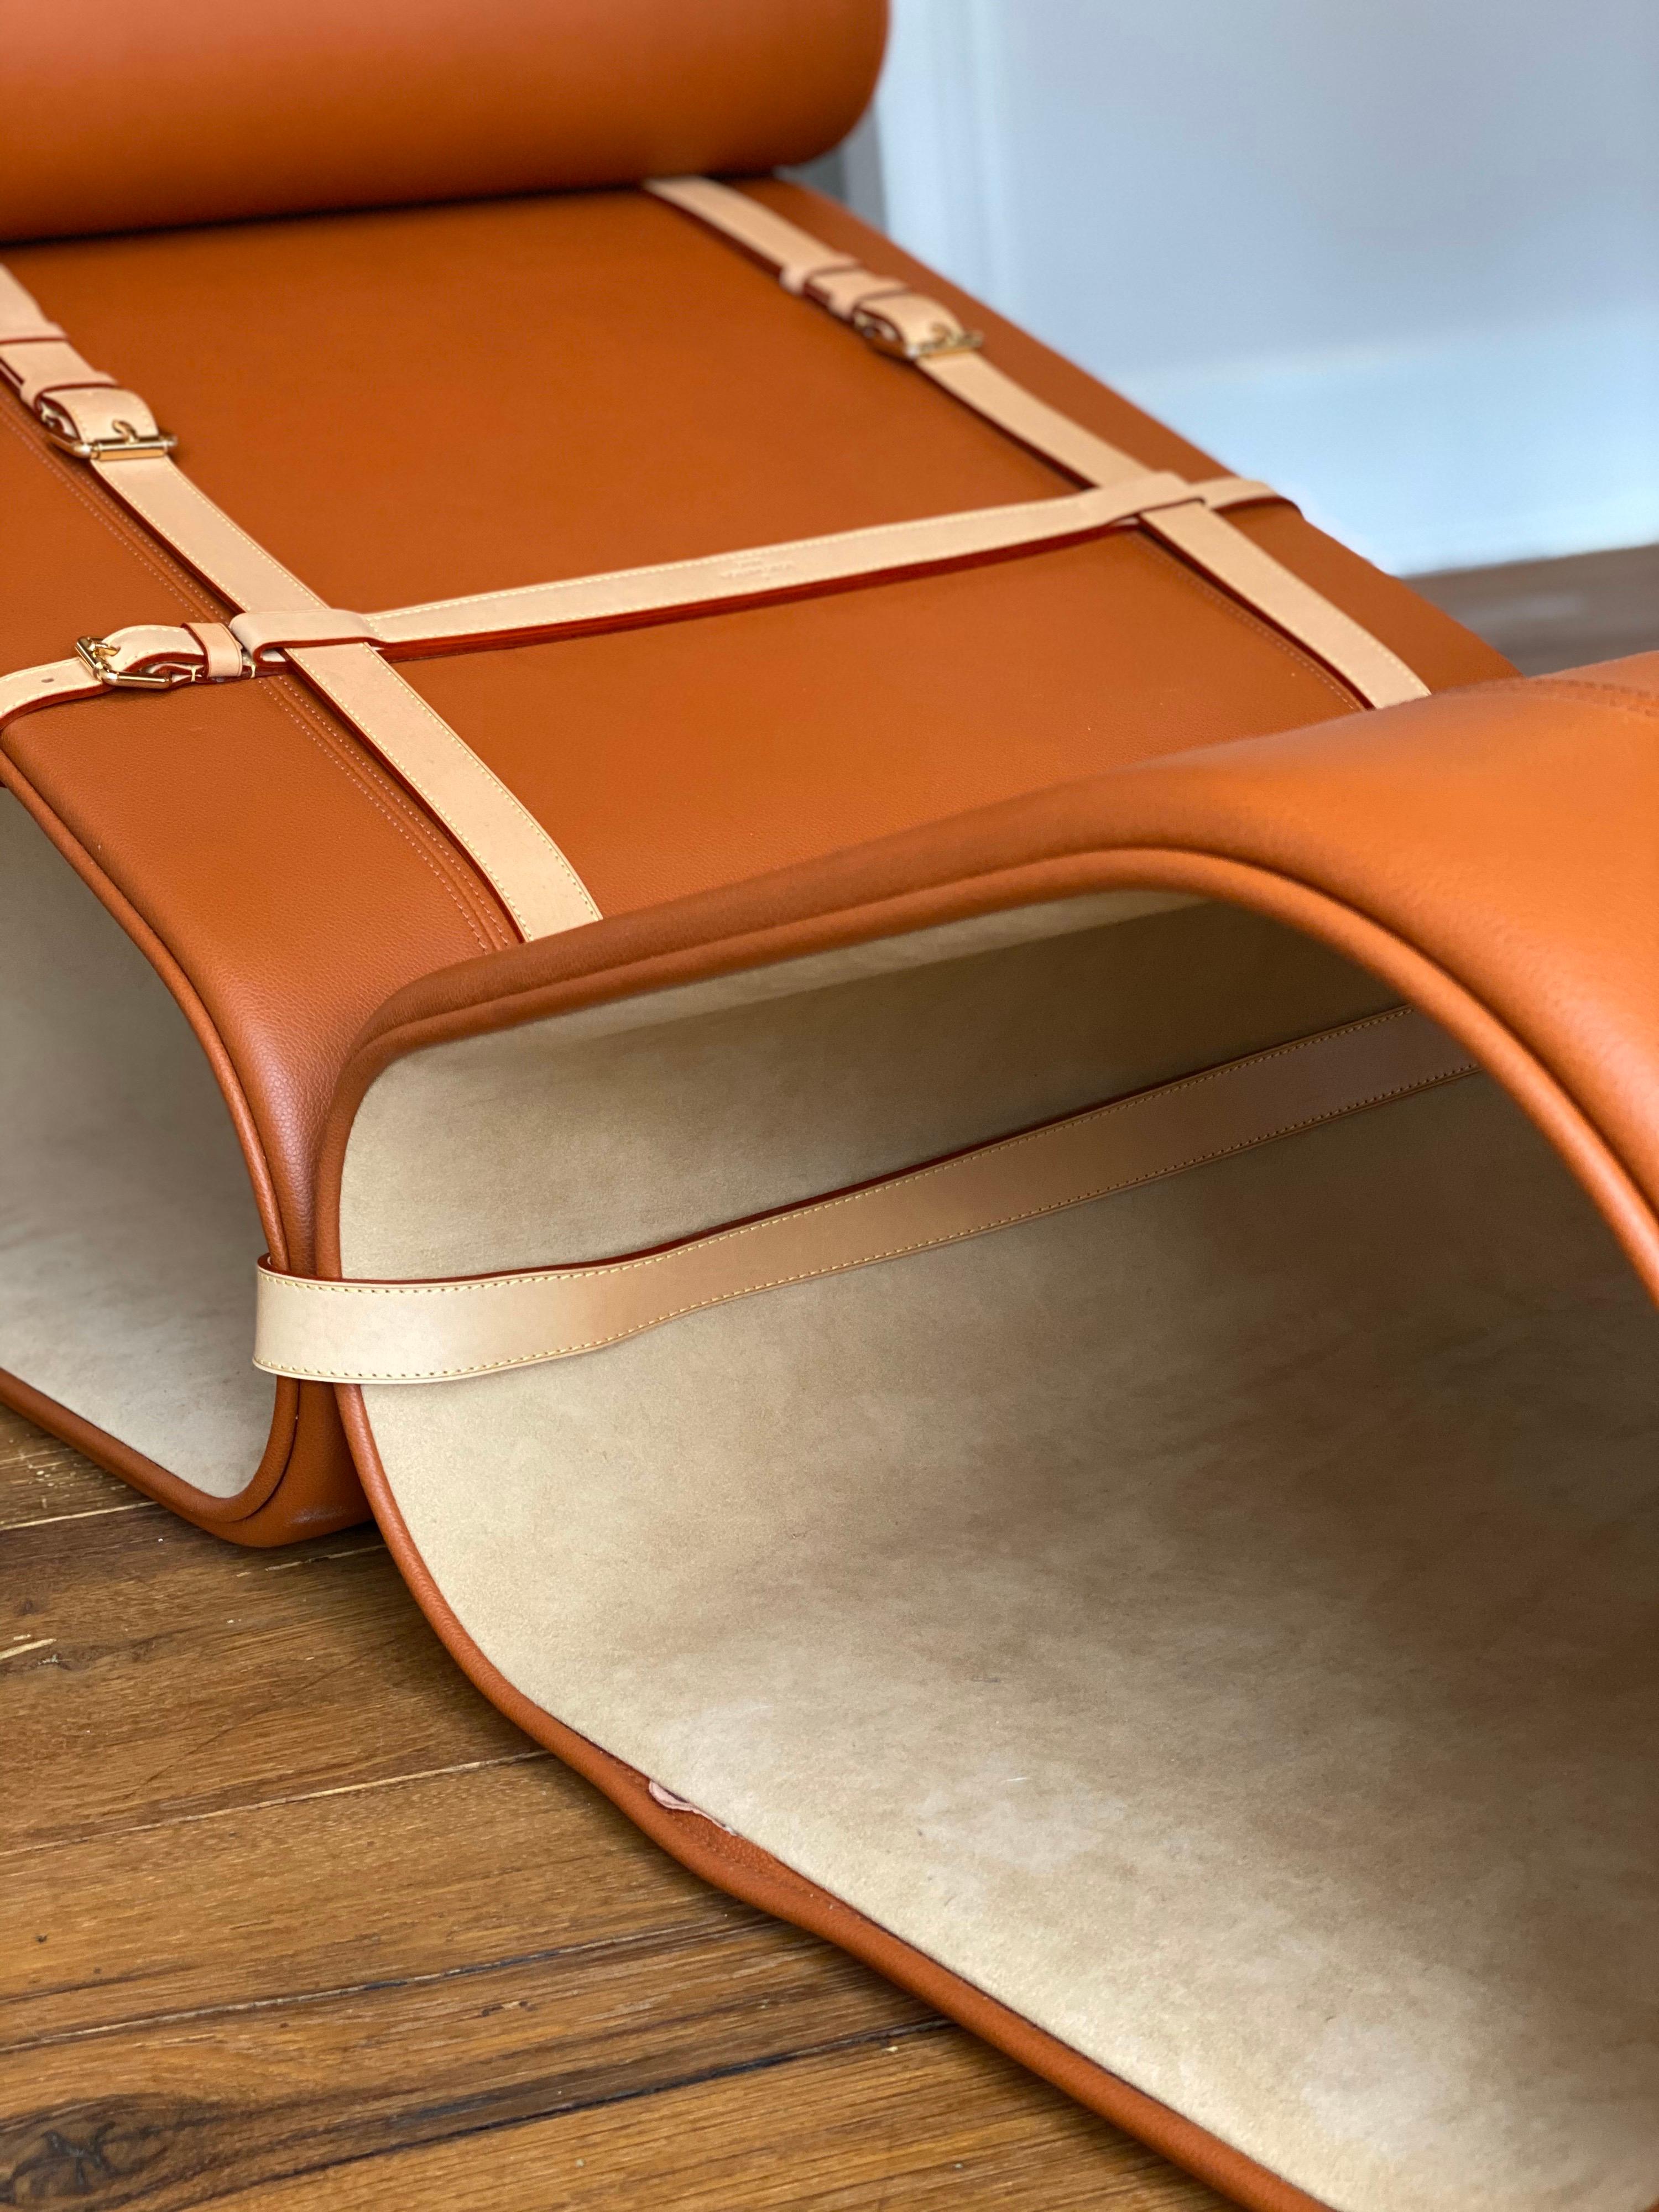 Leather Lounge Chair by Marcel Wanders for Louis Vuitton, Edition of 30